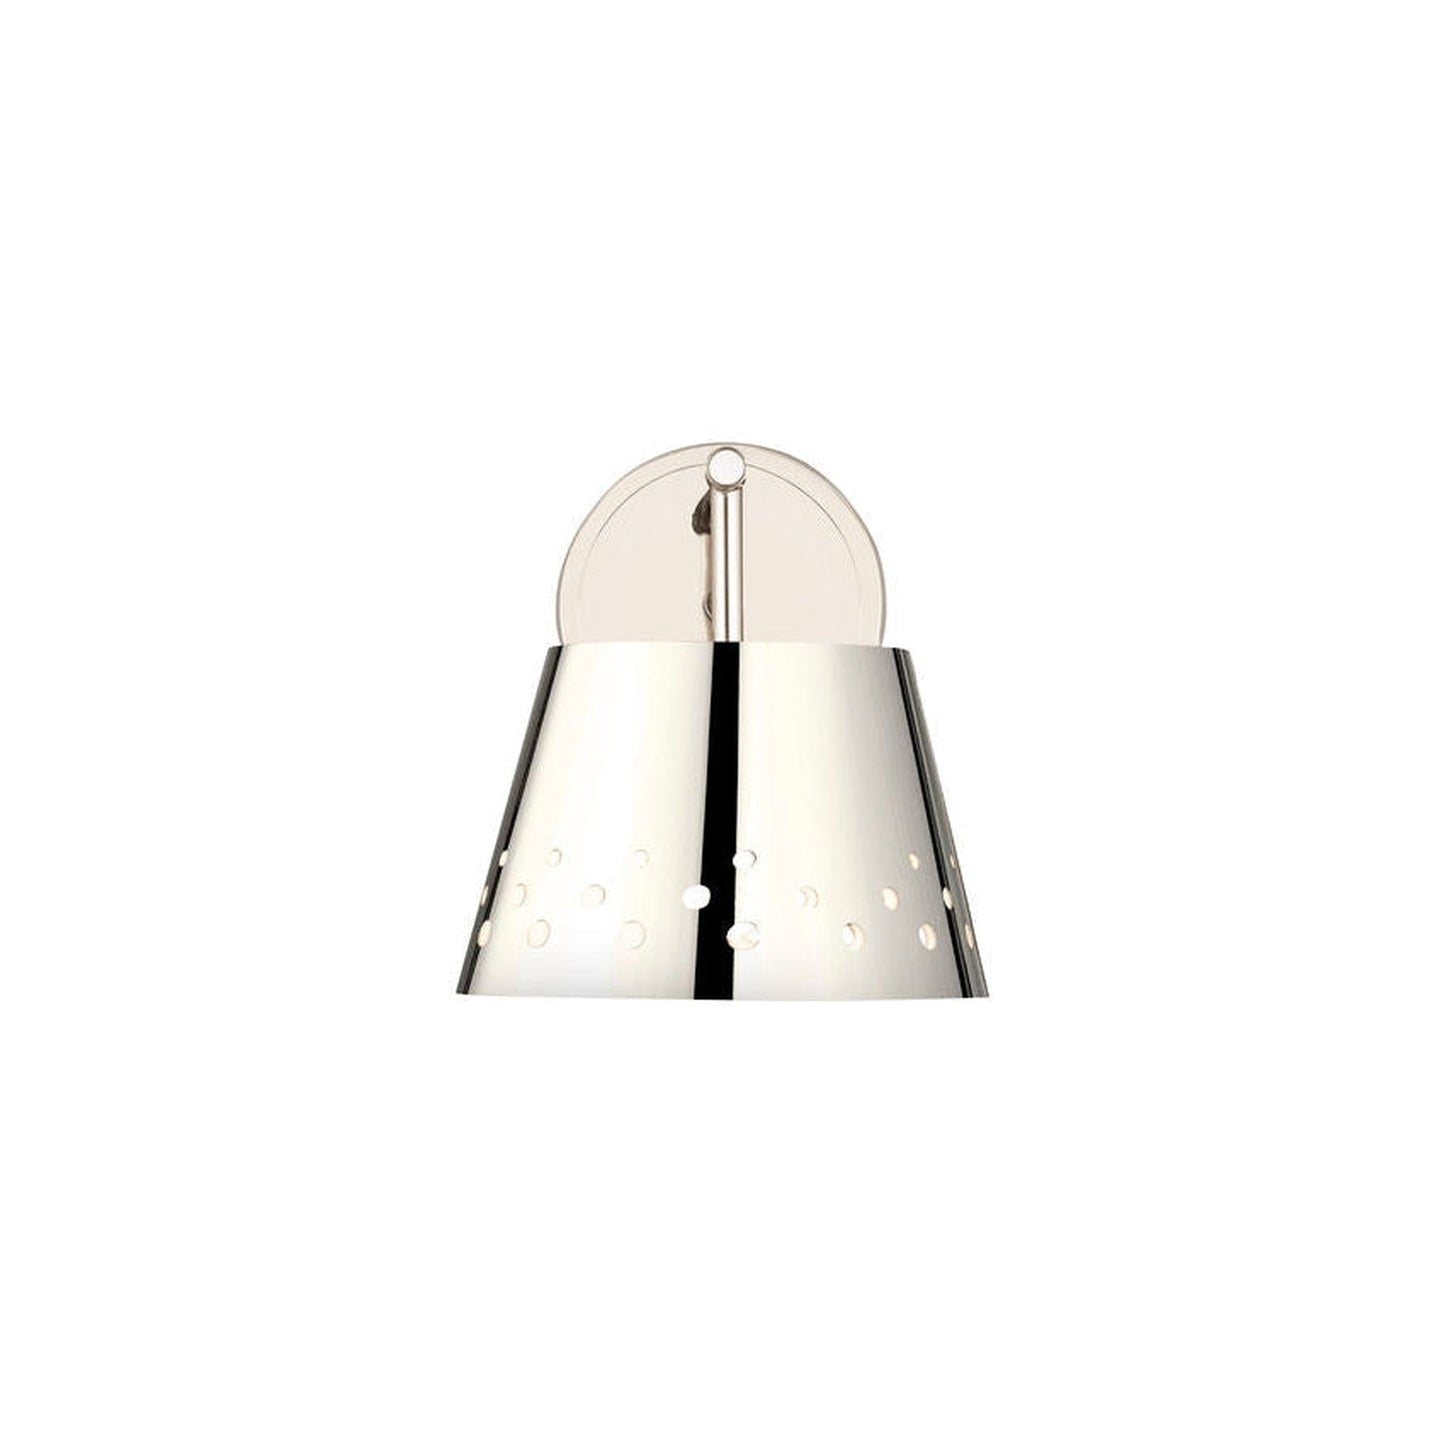 Z-Lite Katie 8" 1-Light Polished Nickel Wall Sconce With Iron Polished Nickel Shade